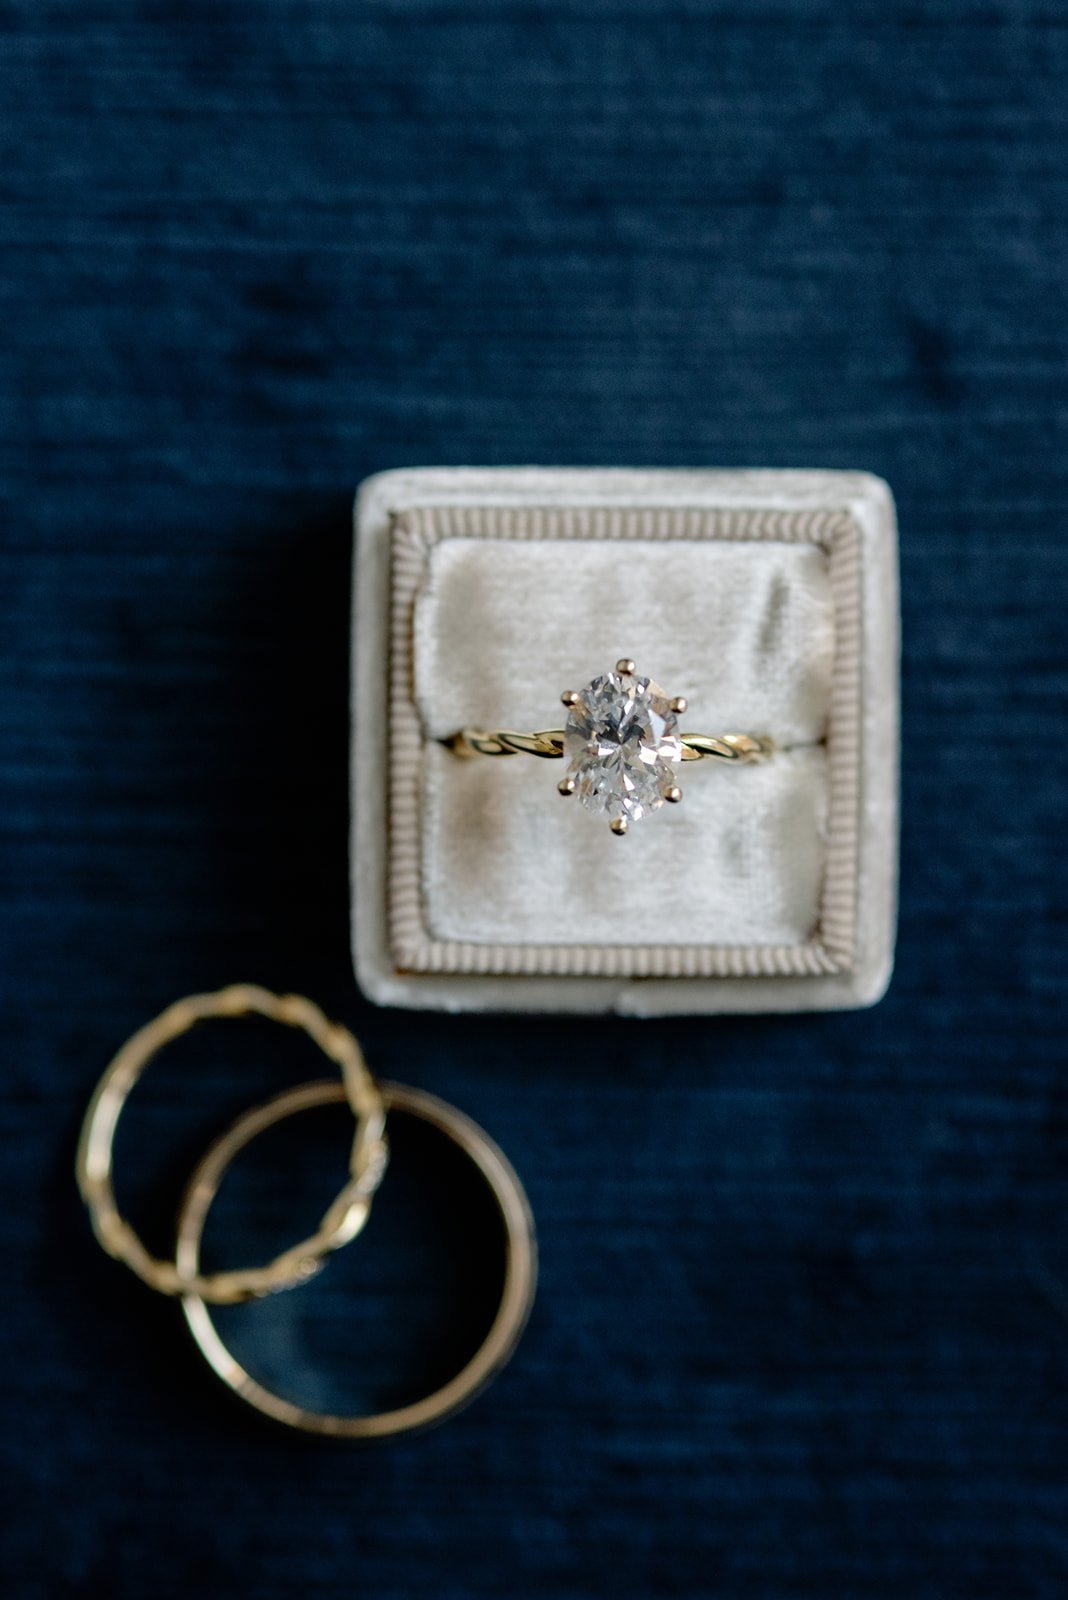  Gold oval diamond engagement ring from Touch of Gold Halifax in velvet ring box on navy blue background 